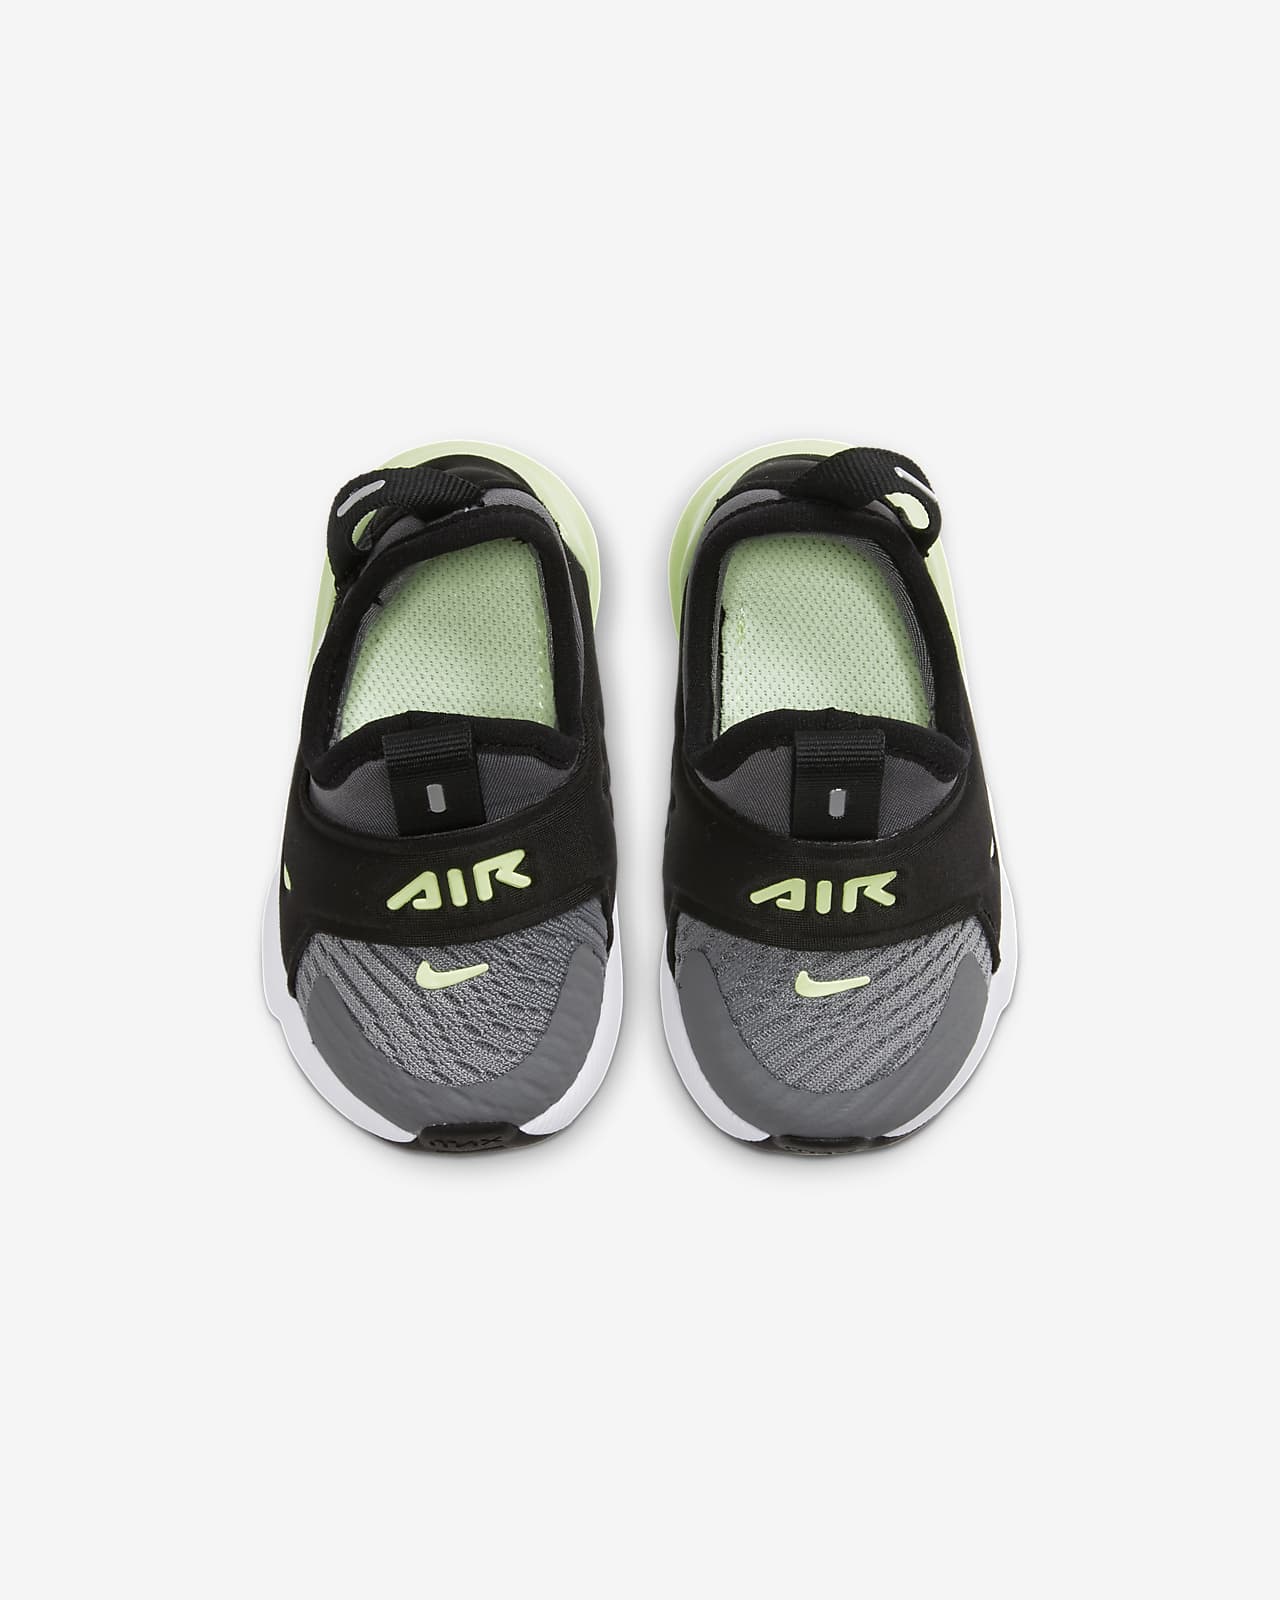 nike store baby shoes